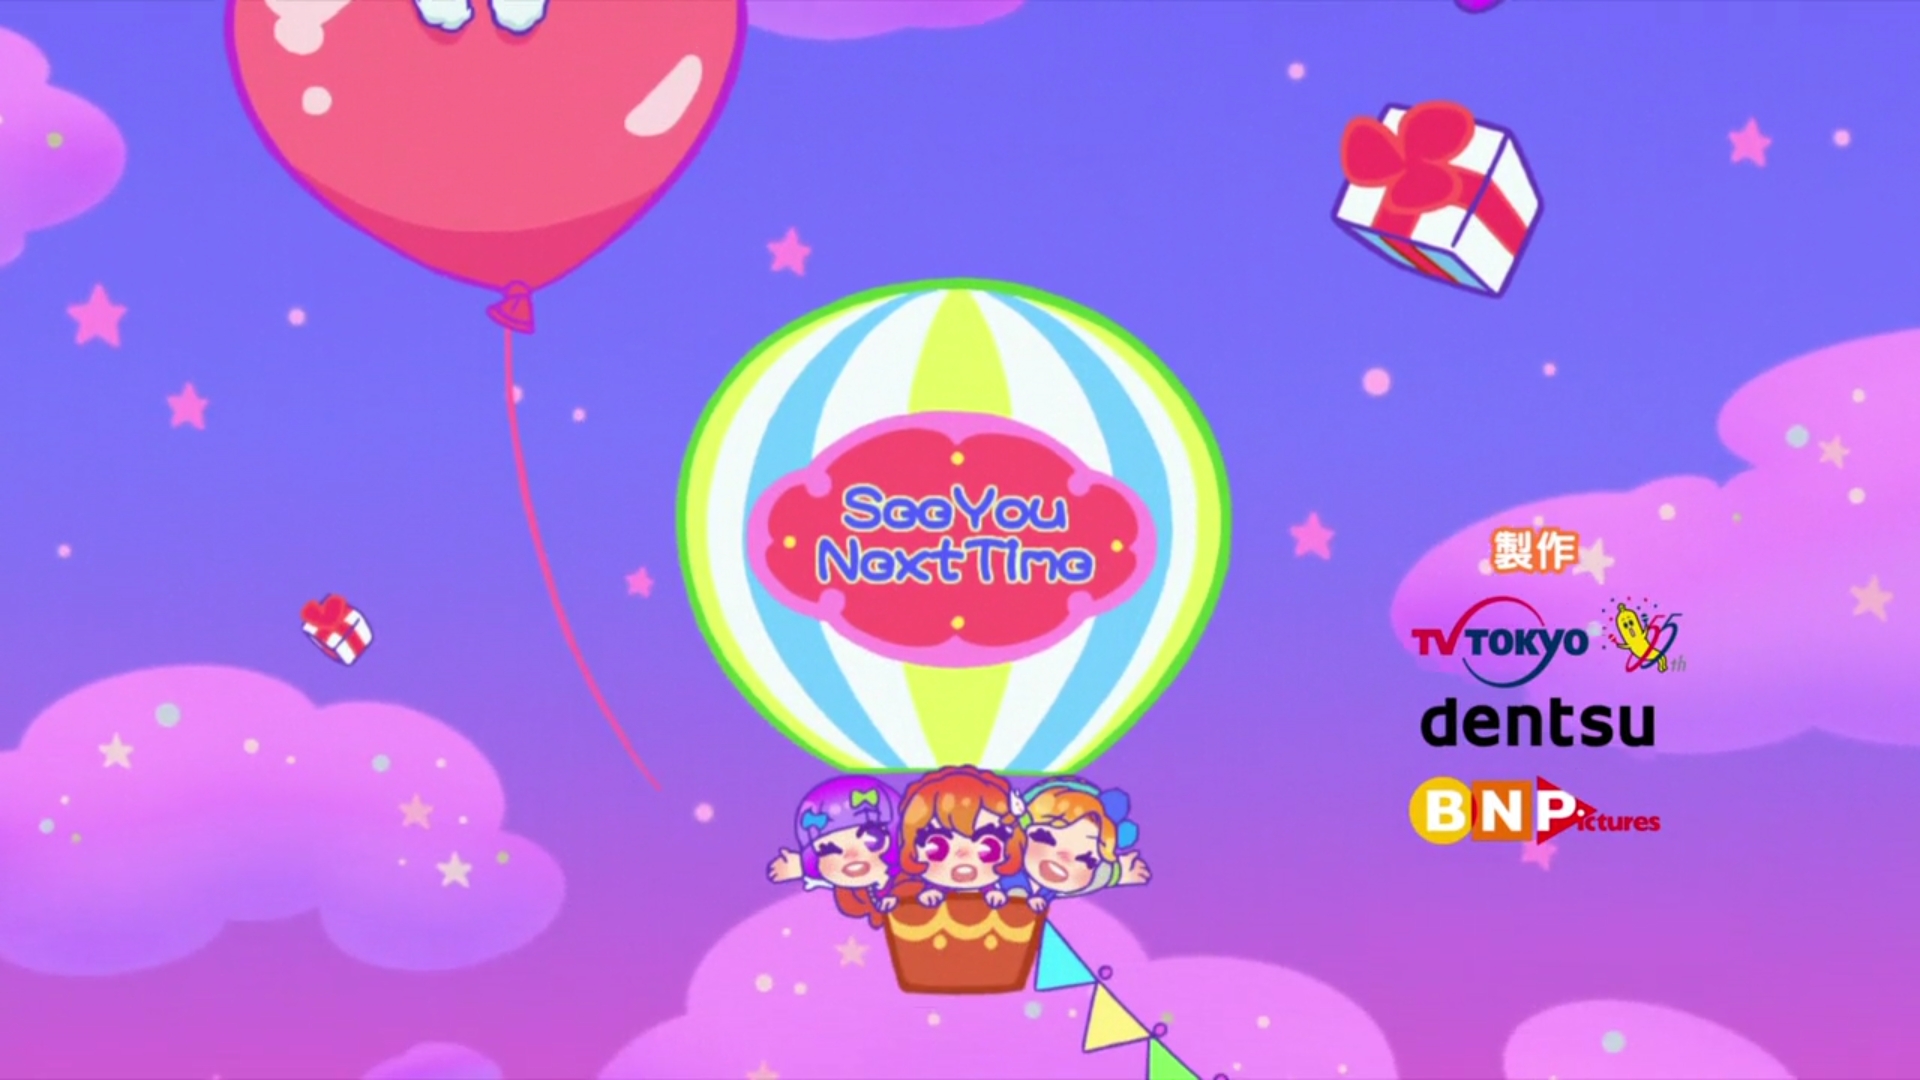 Chat With My Melody Via Text Message Everyday With Sanrio's Official New  App, MOSHI MOSHI NIPPON